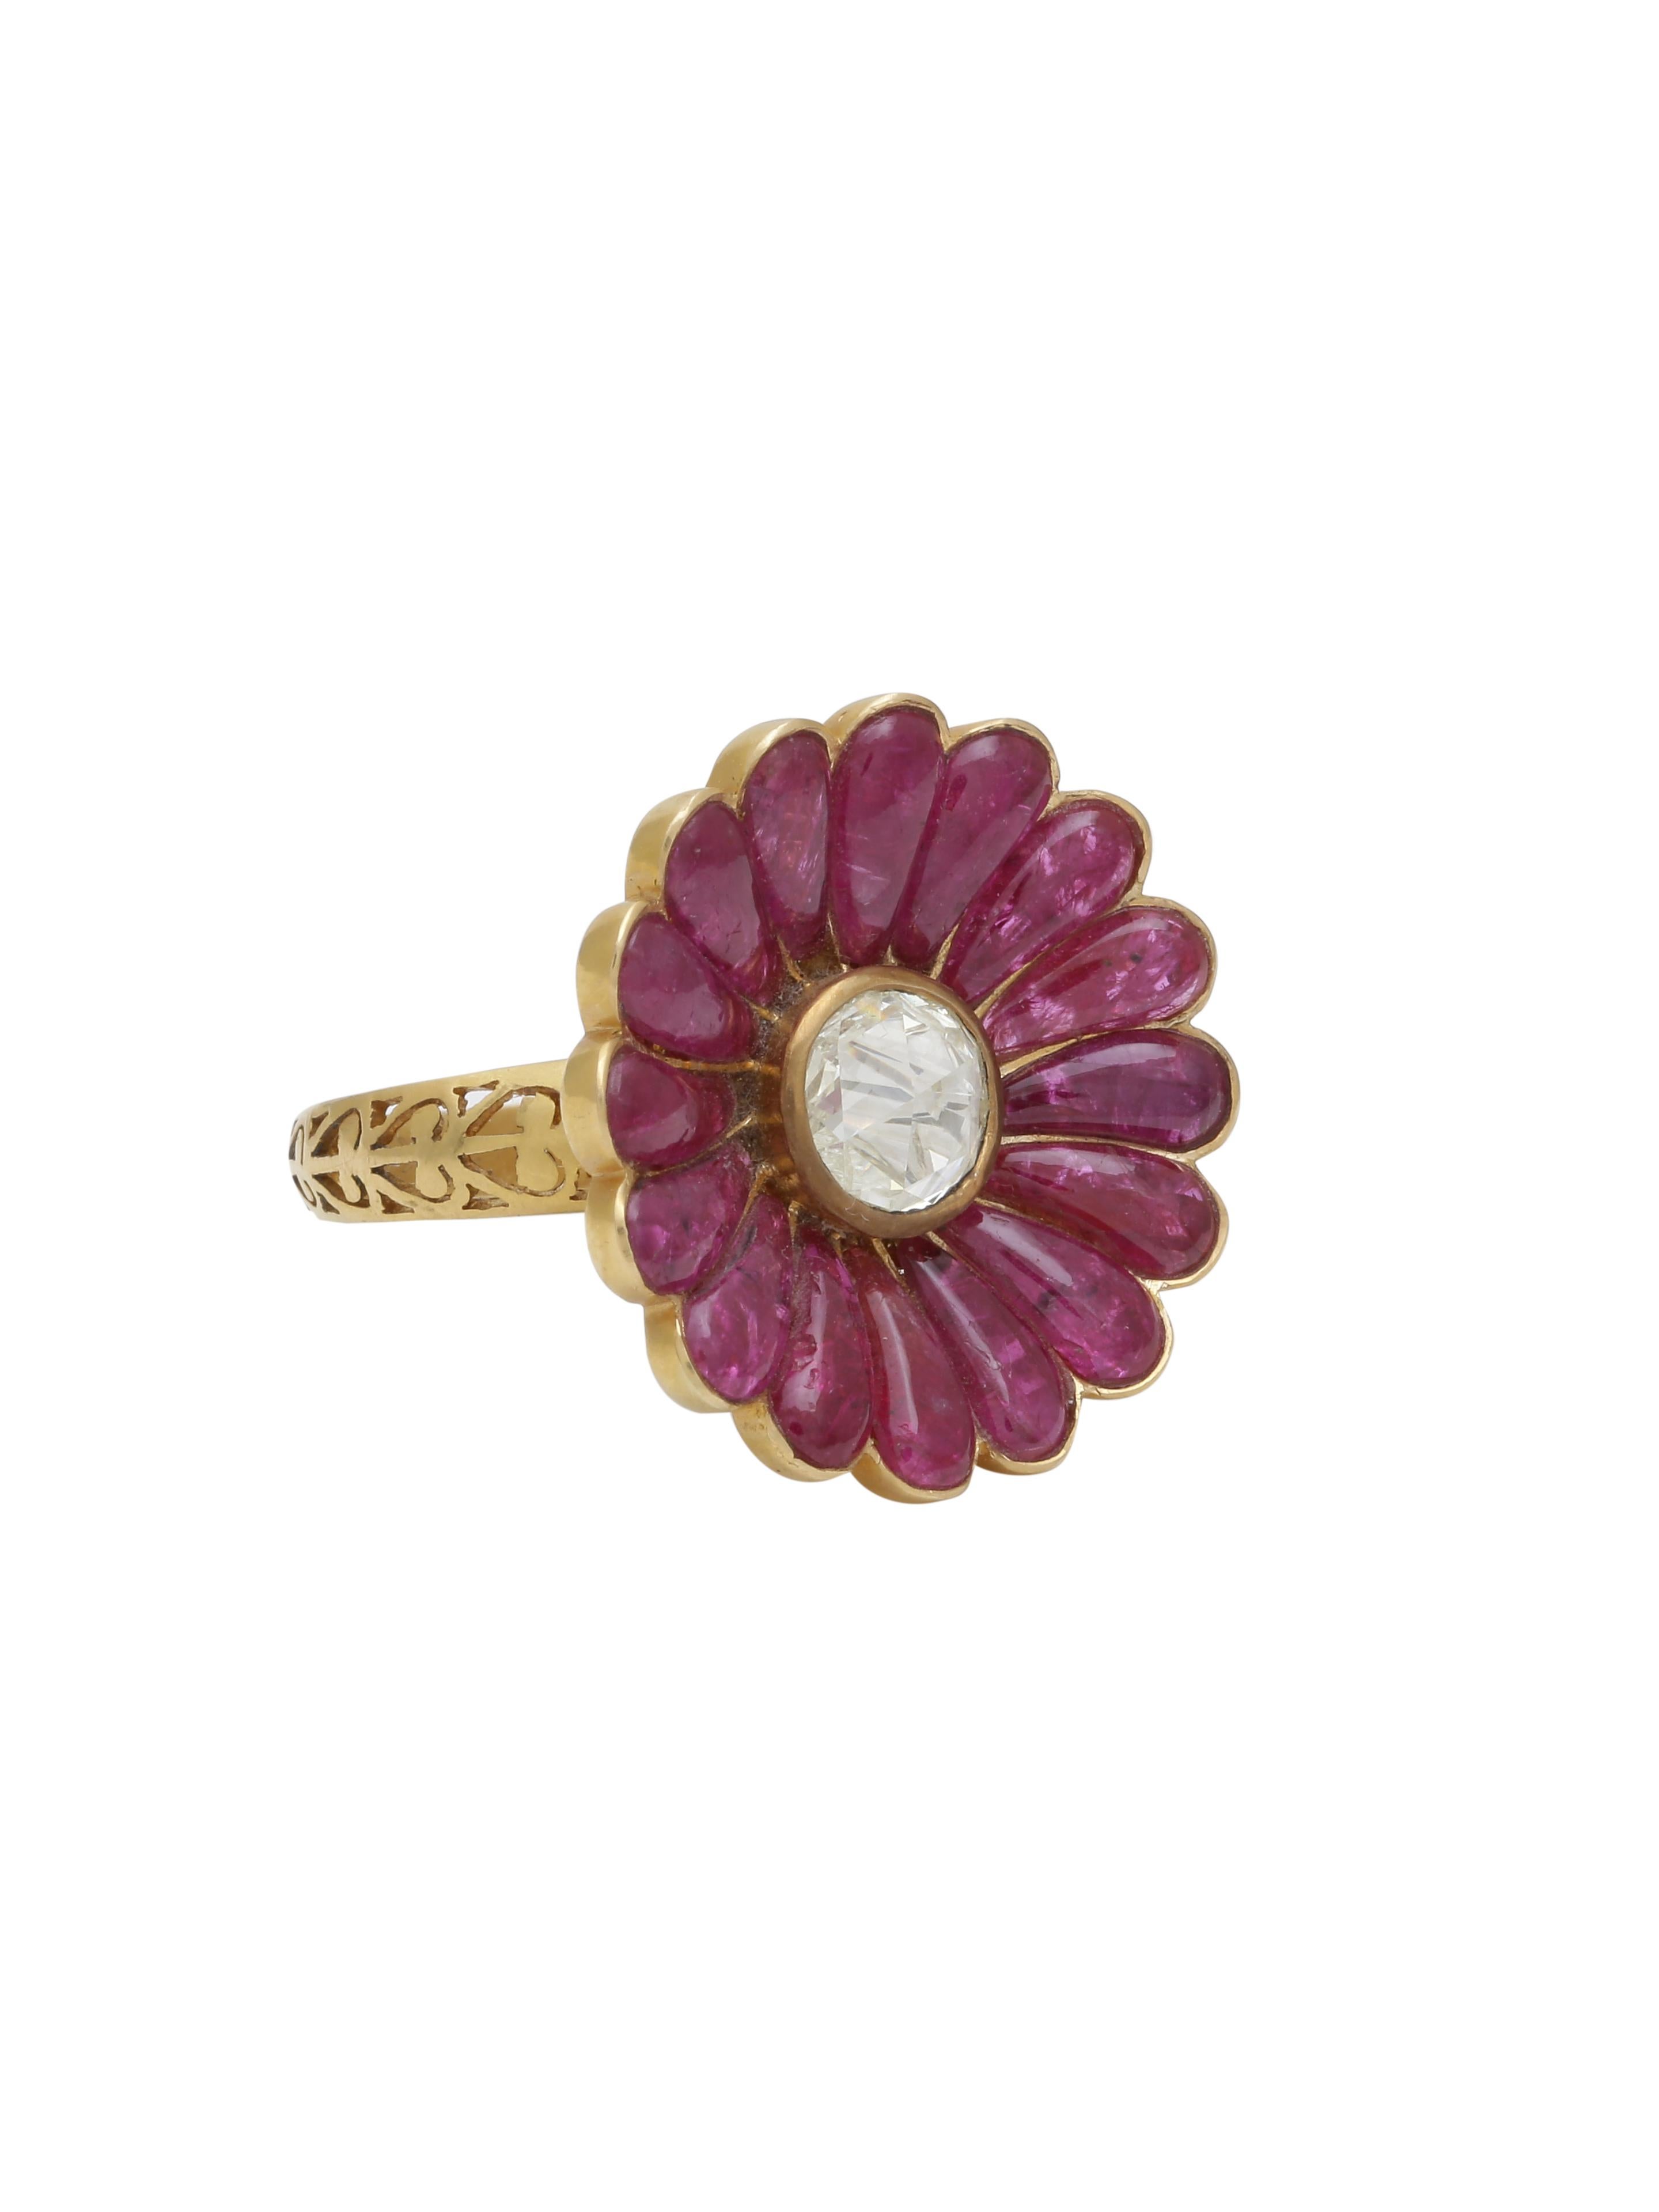 Modern Ruby and Diamond Flower Cocktail Ring Handcrafted in 18 Karat Yellow Gold For Sale